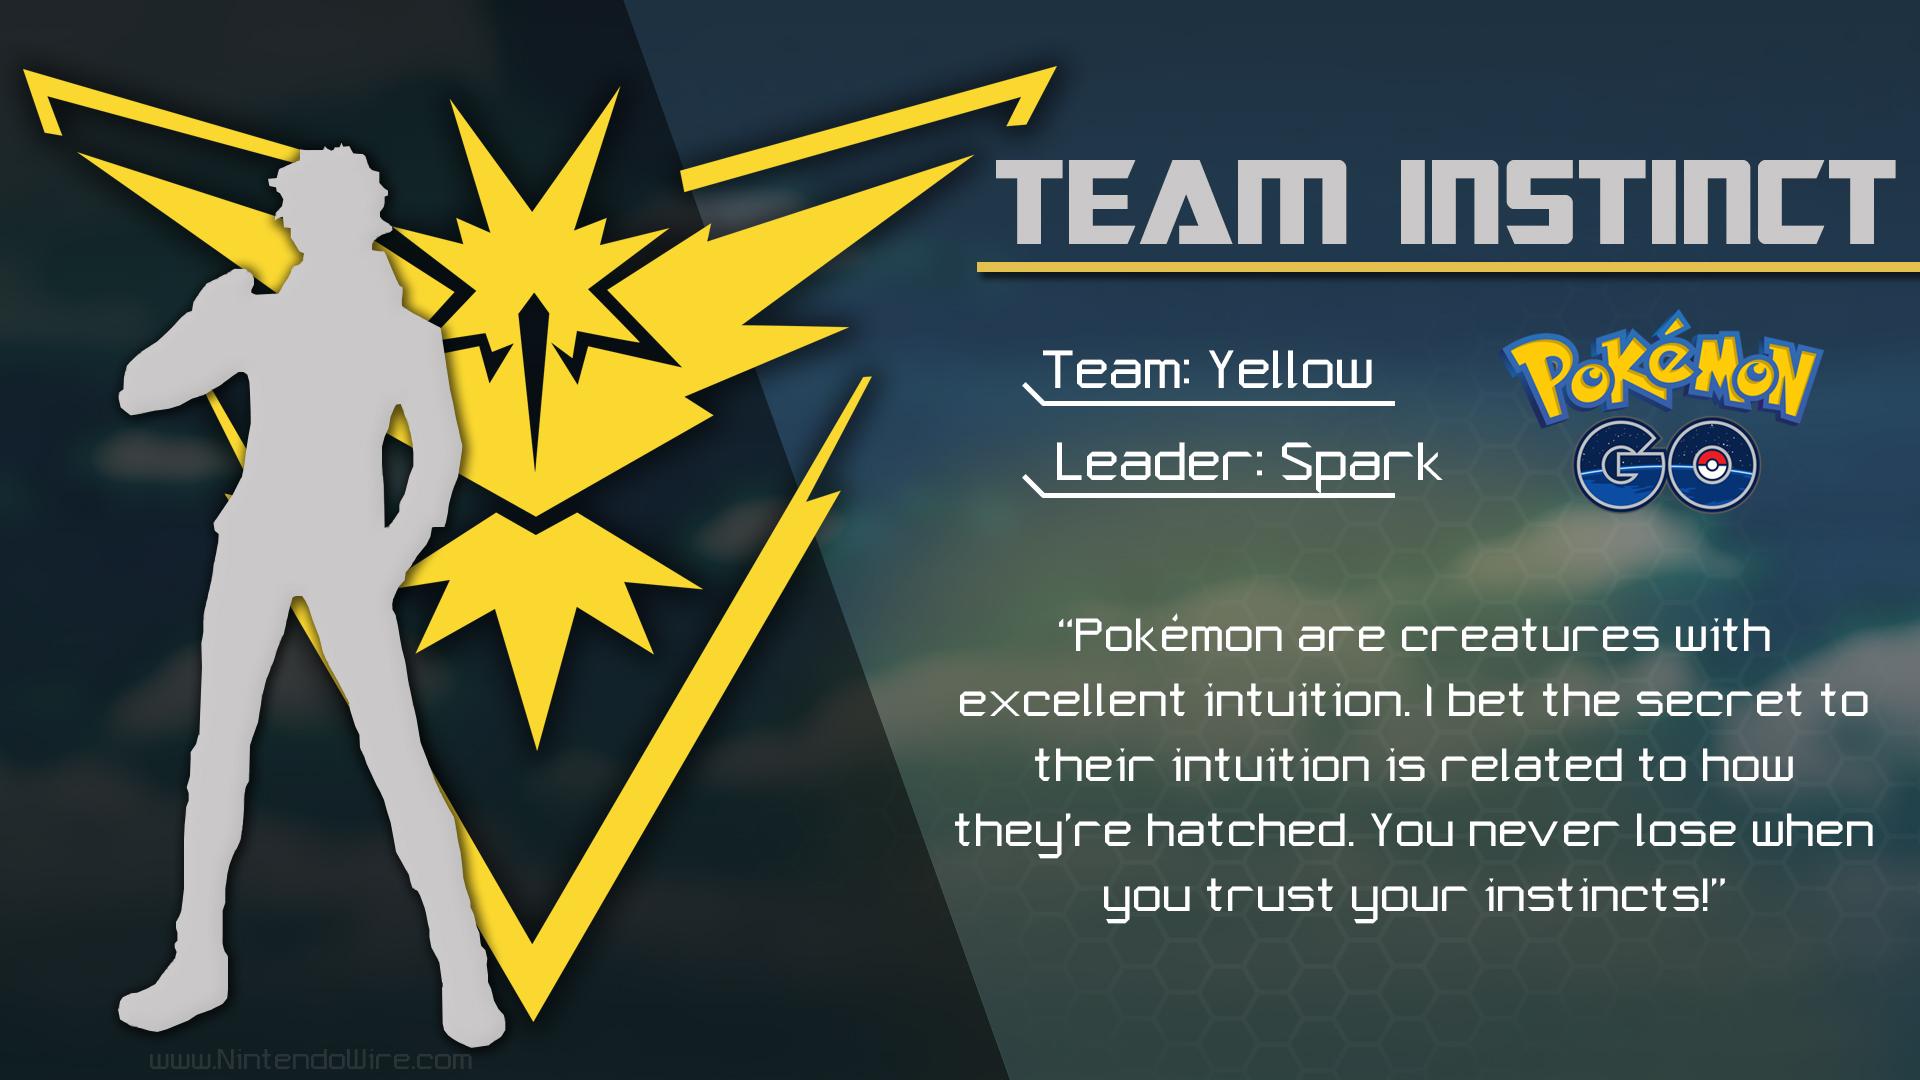 Share your Pokémon GO team pride online, and display it